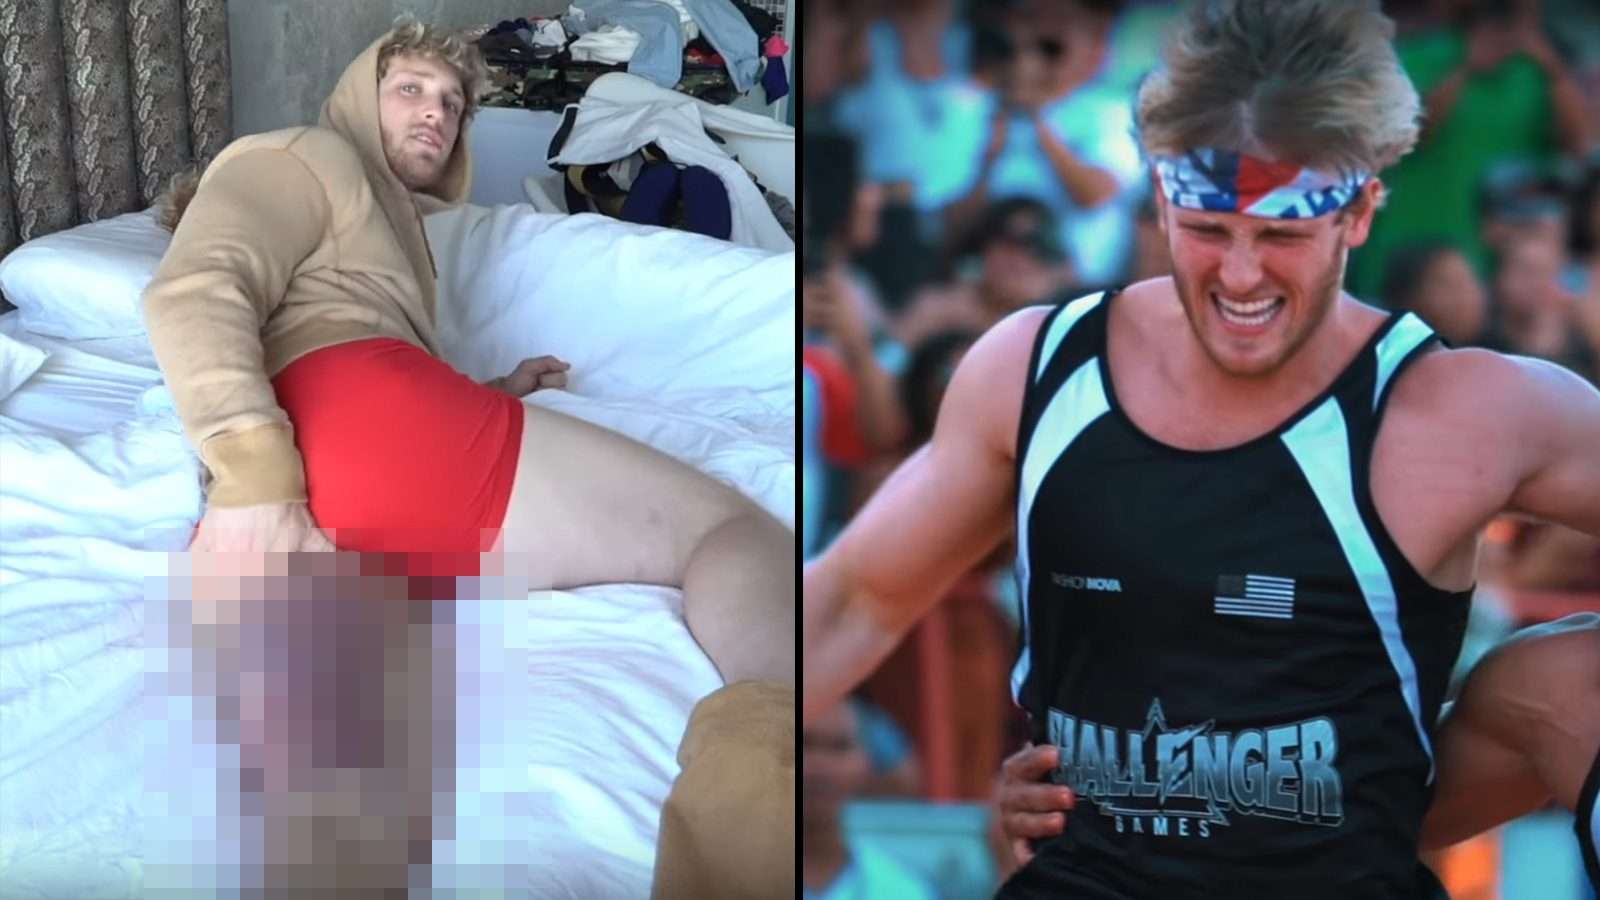 Logan Paul shares update on gruesome leg injury suffered at Challenger Games  - Dexerto